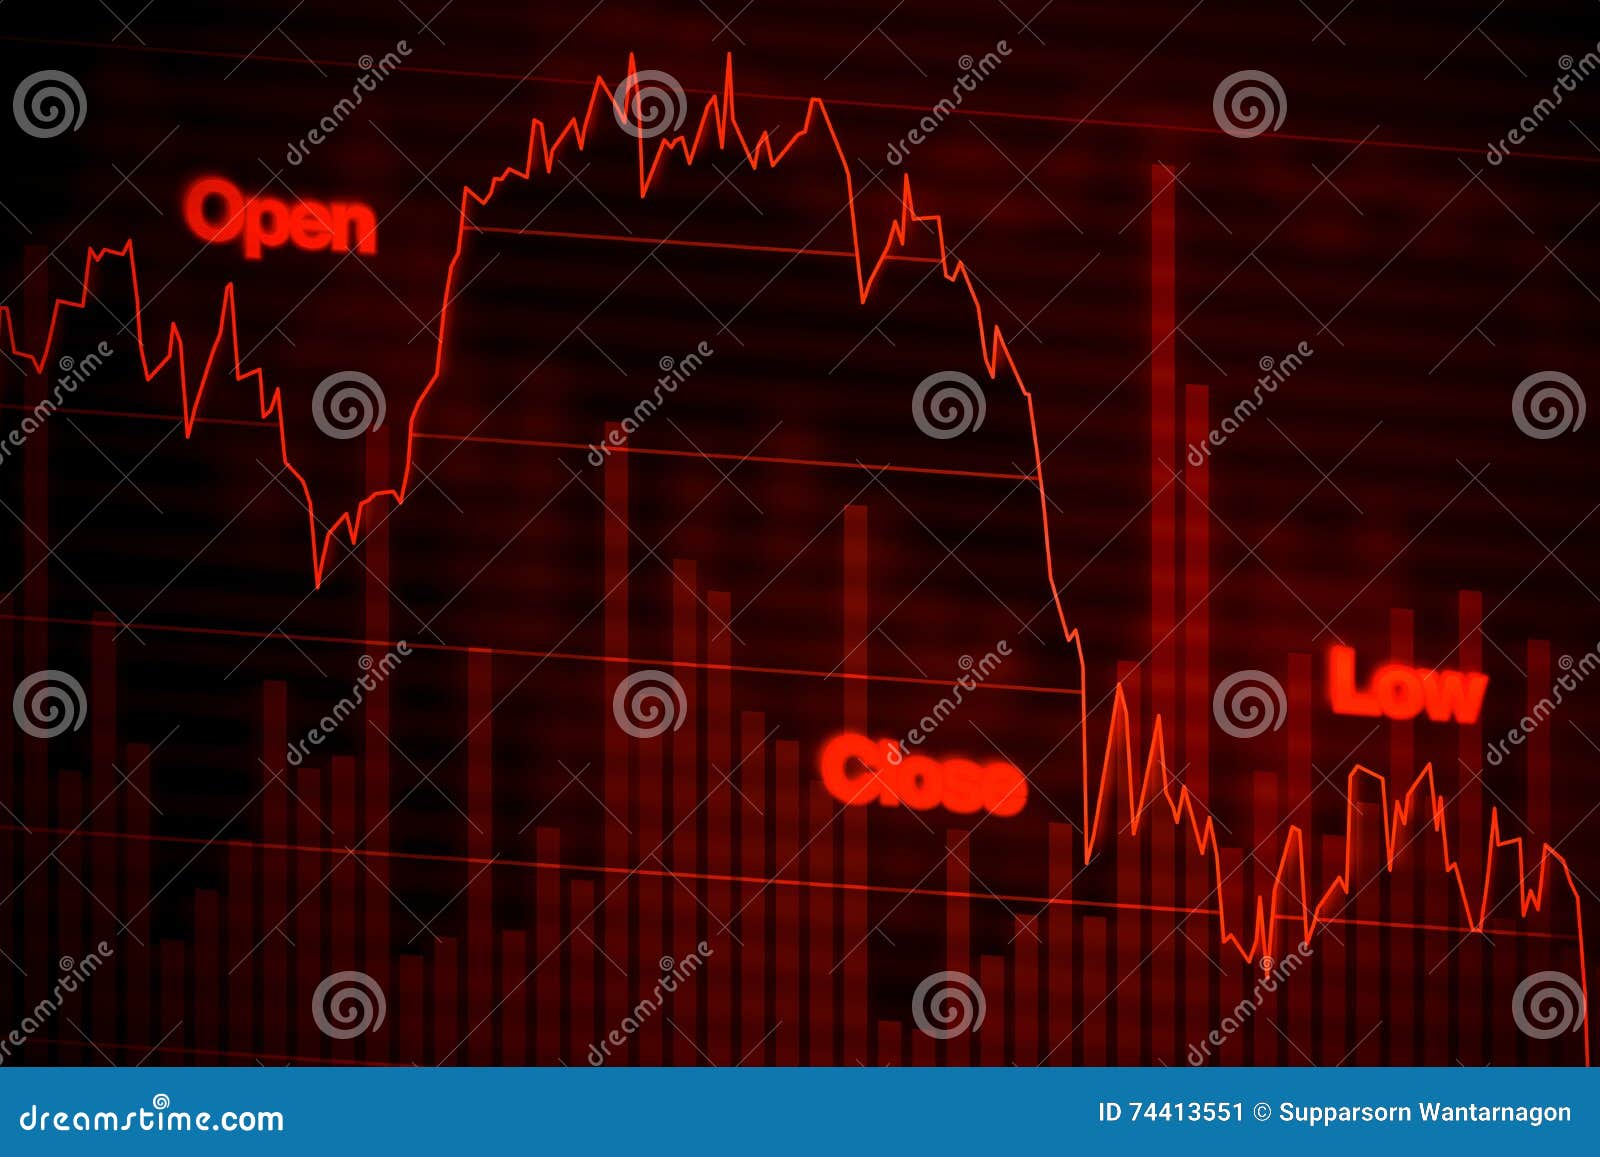 stock market chart falling downward in red